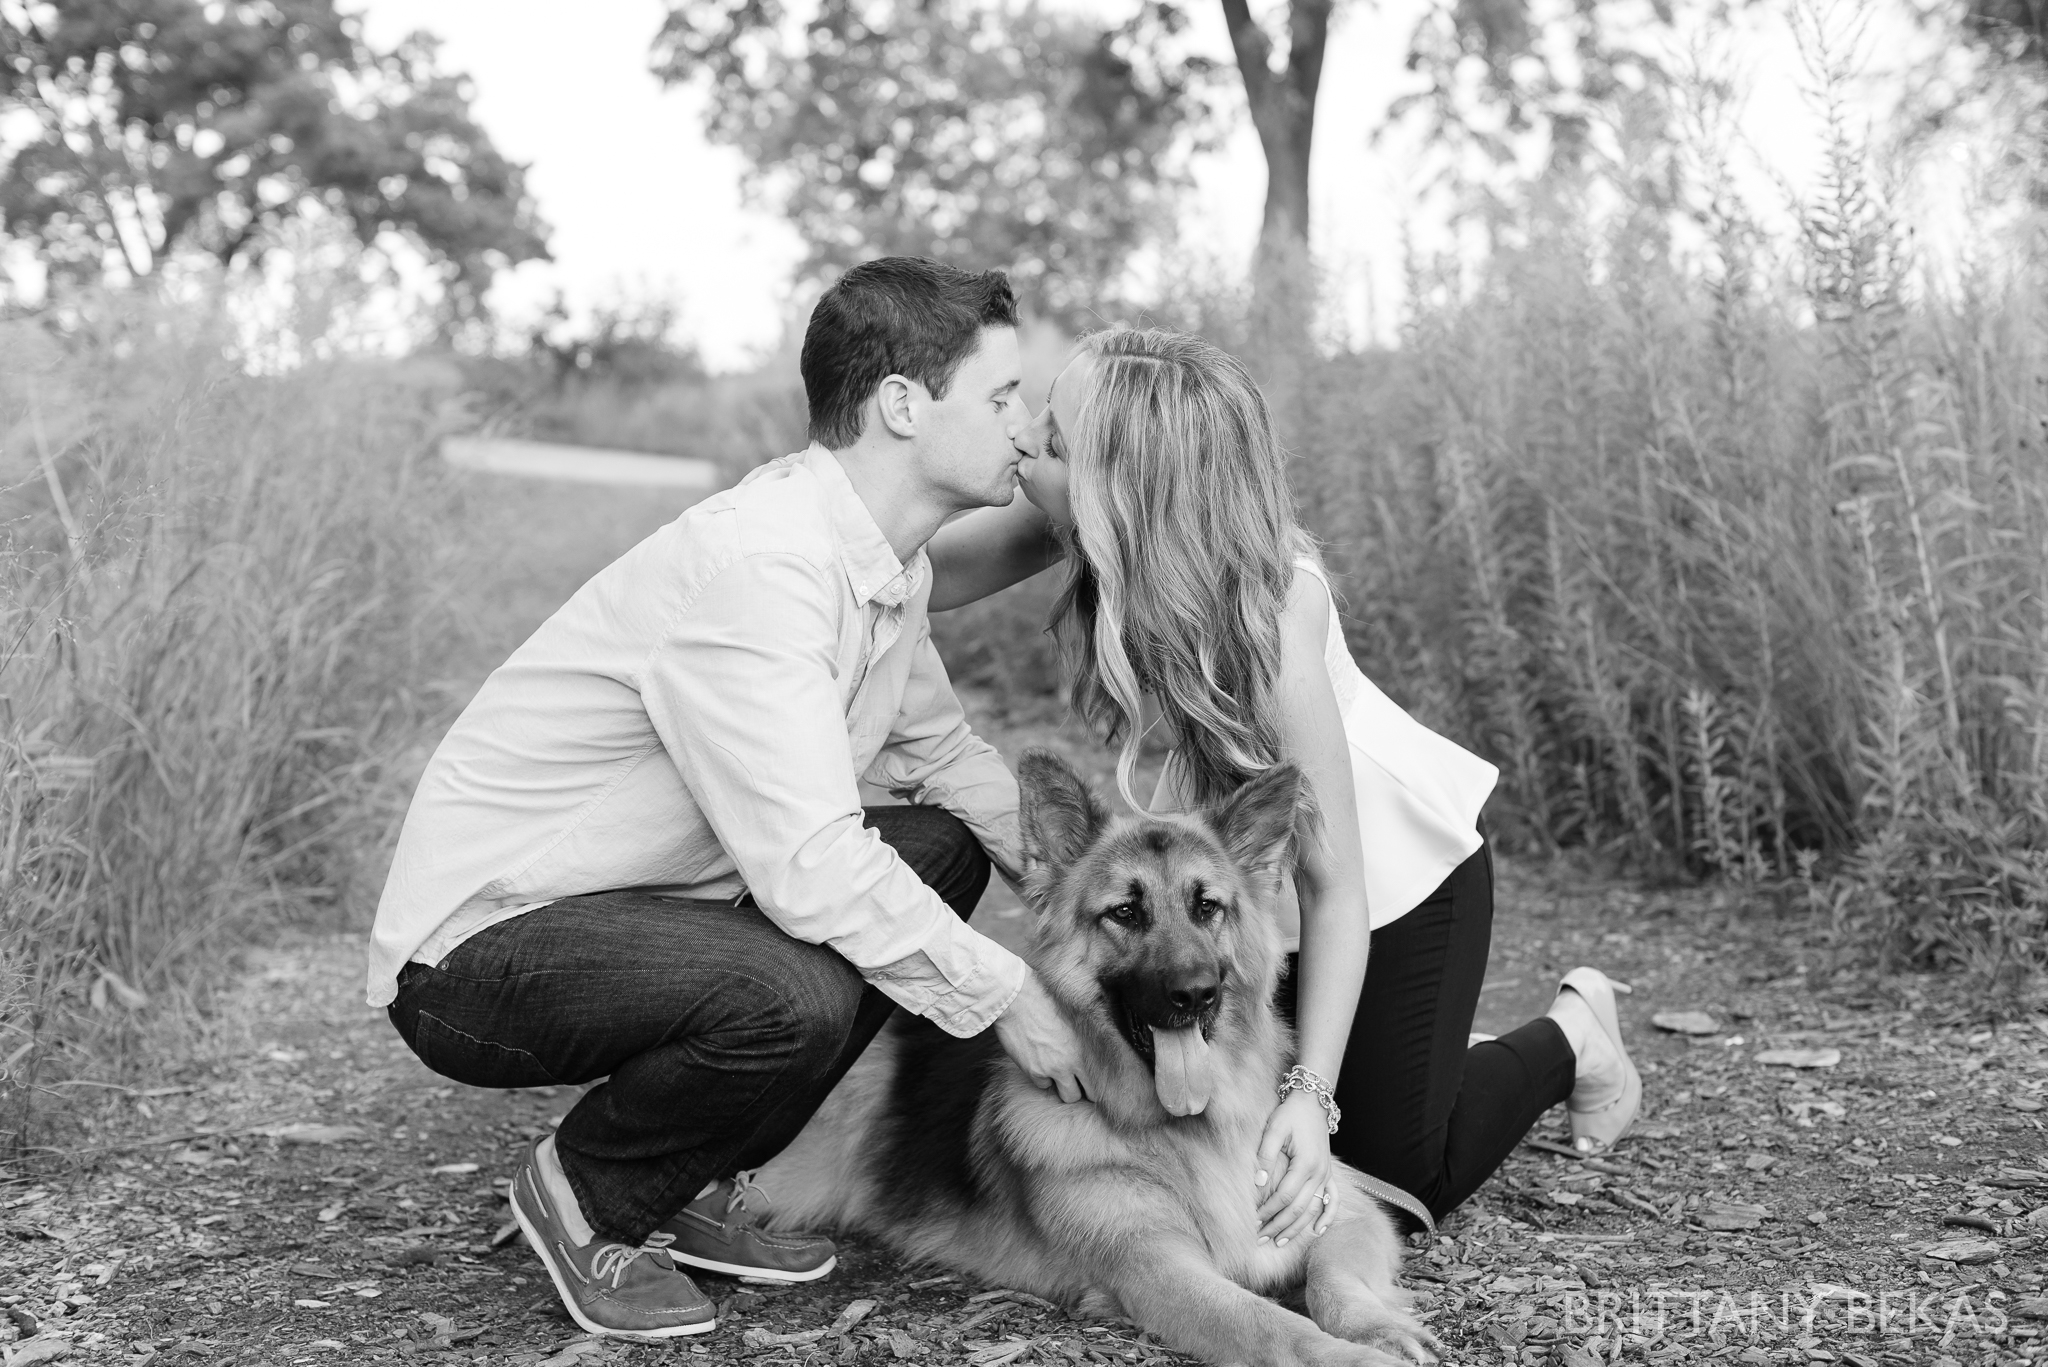 lincoln-park-chicago-engagement-photos-brittany-bekas-photography_0005